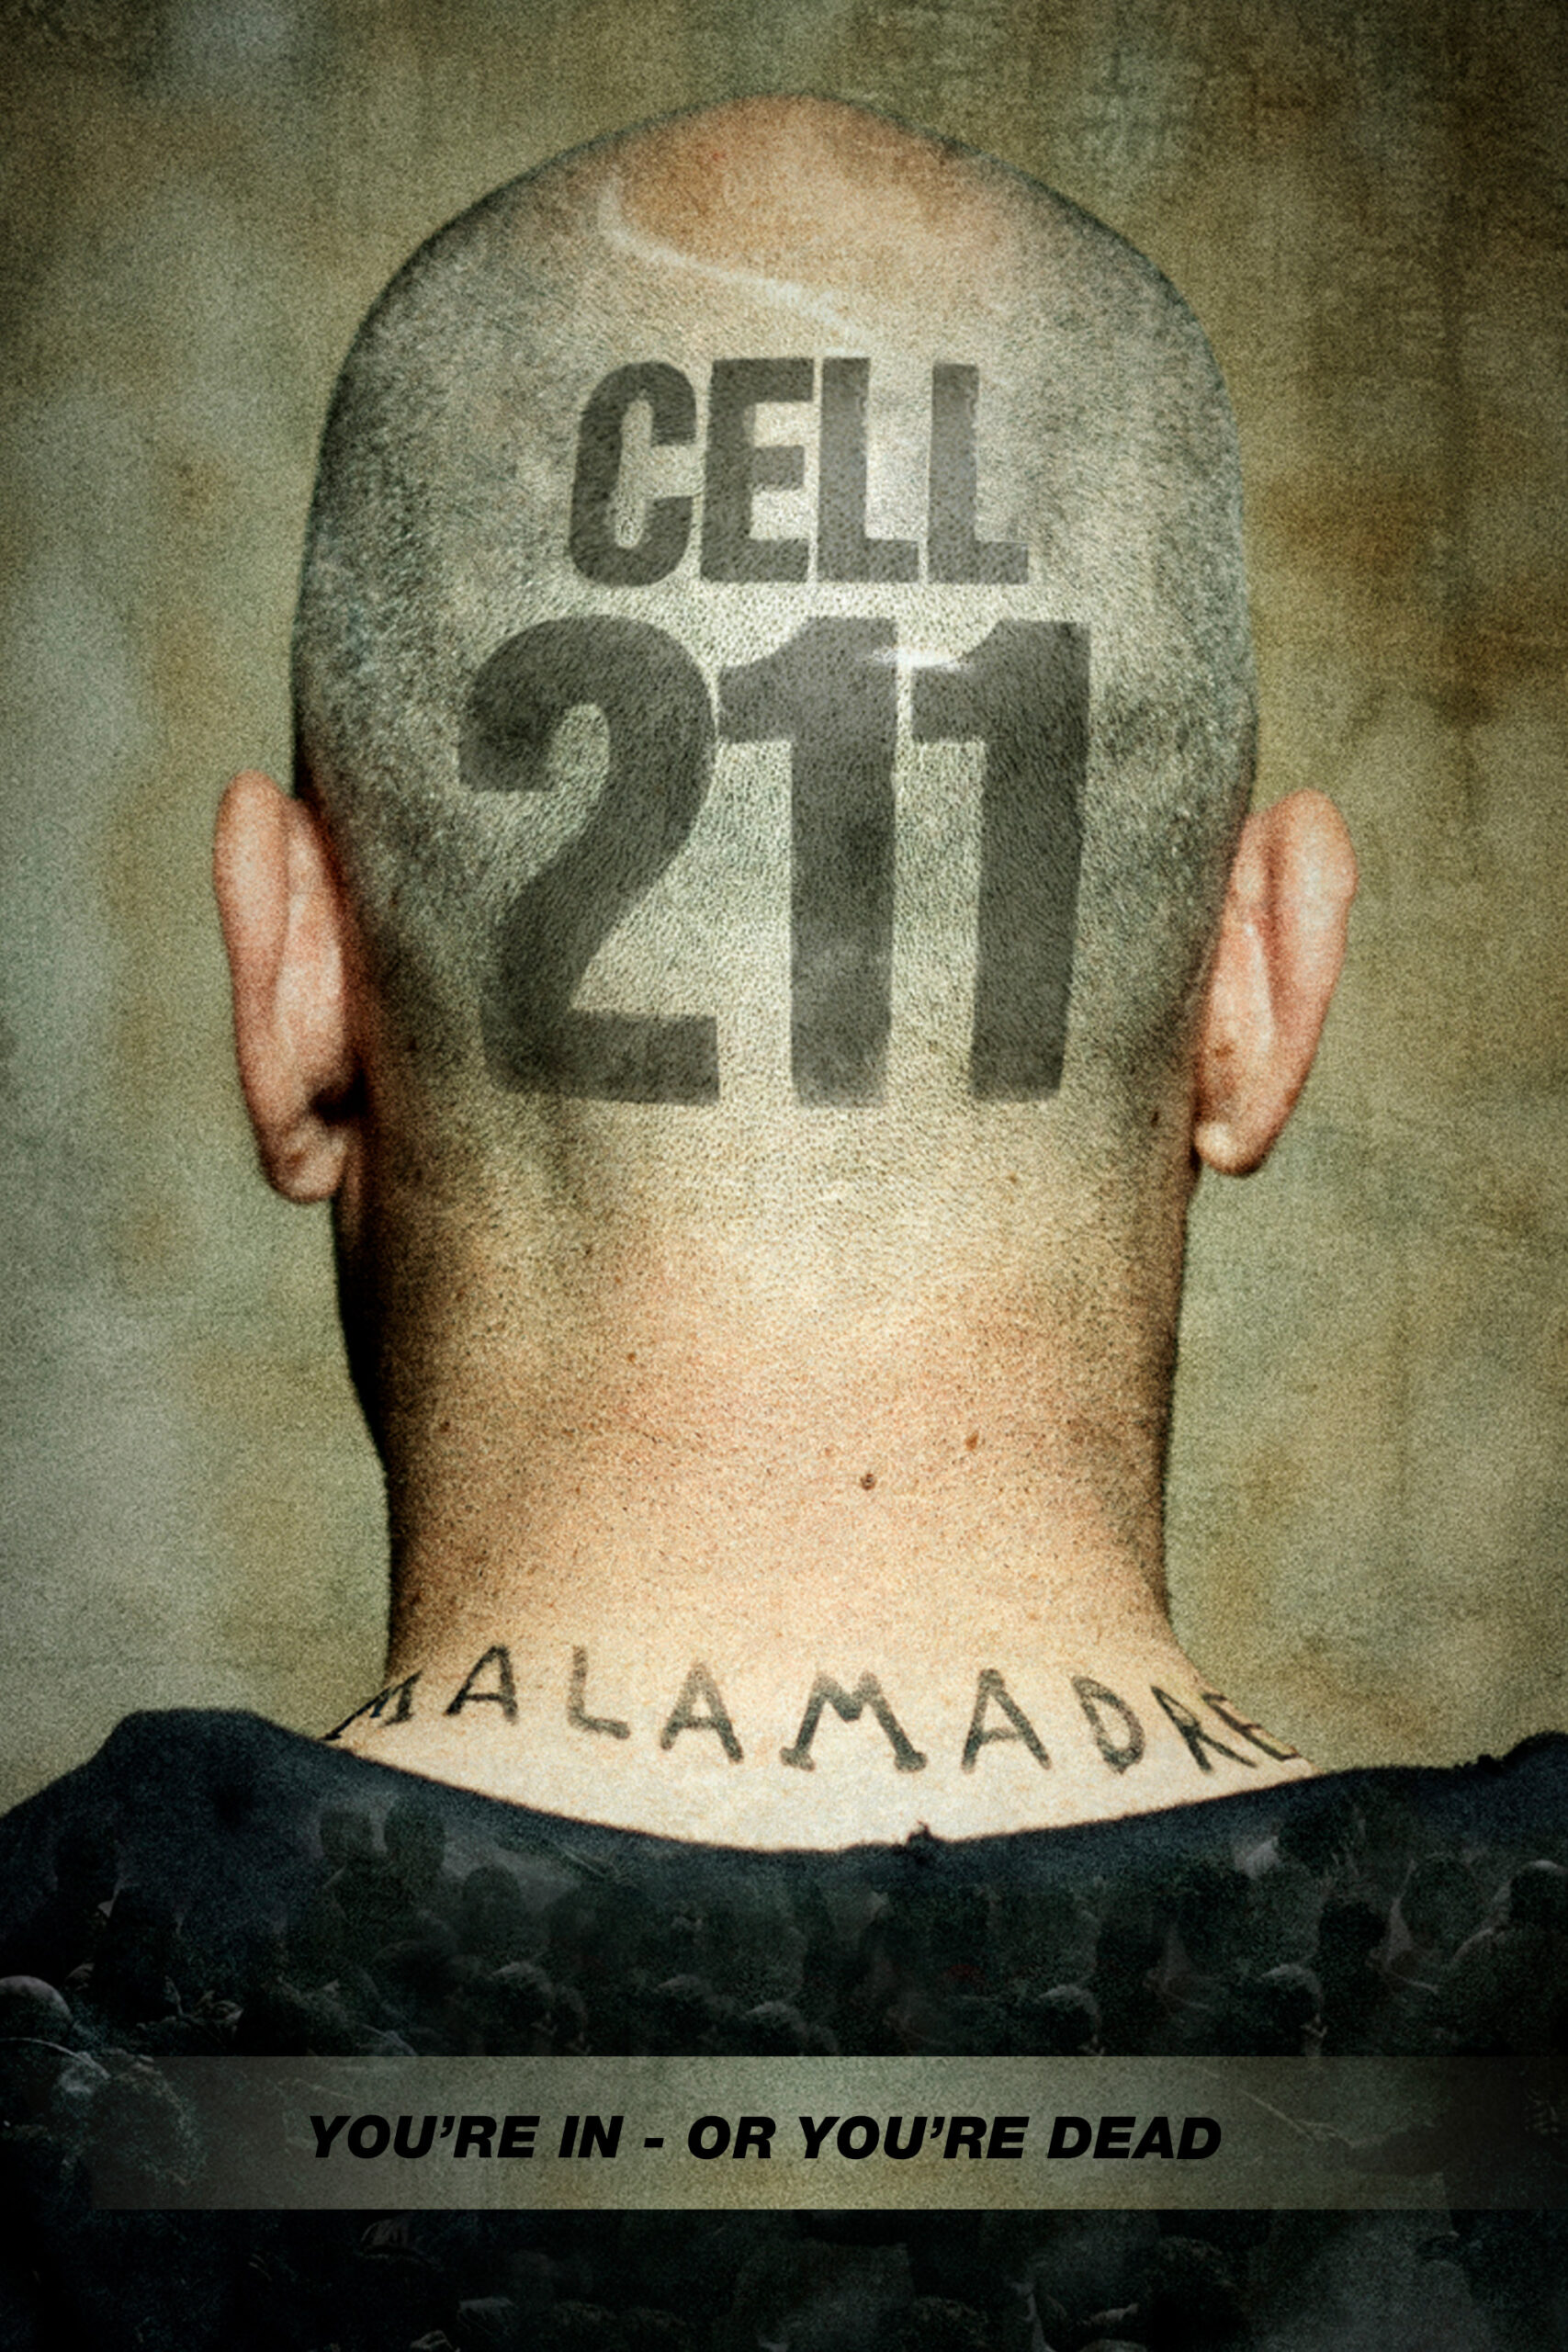 Read more about the article Cell 211